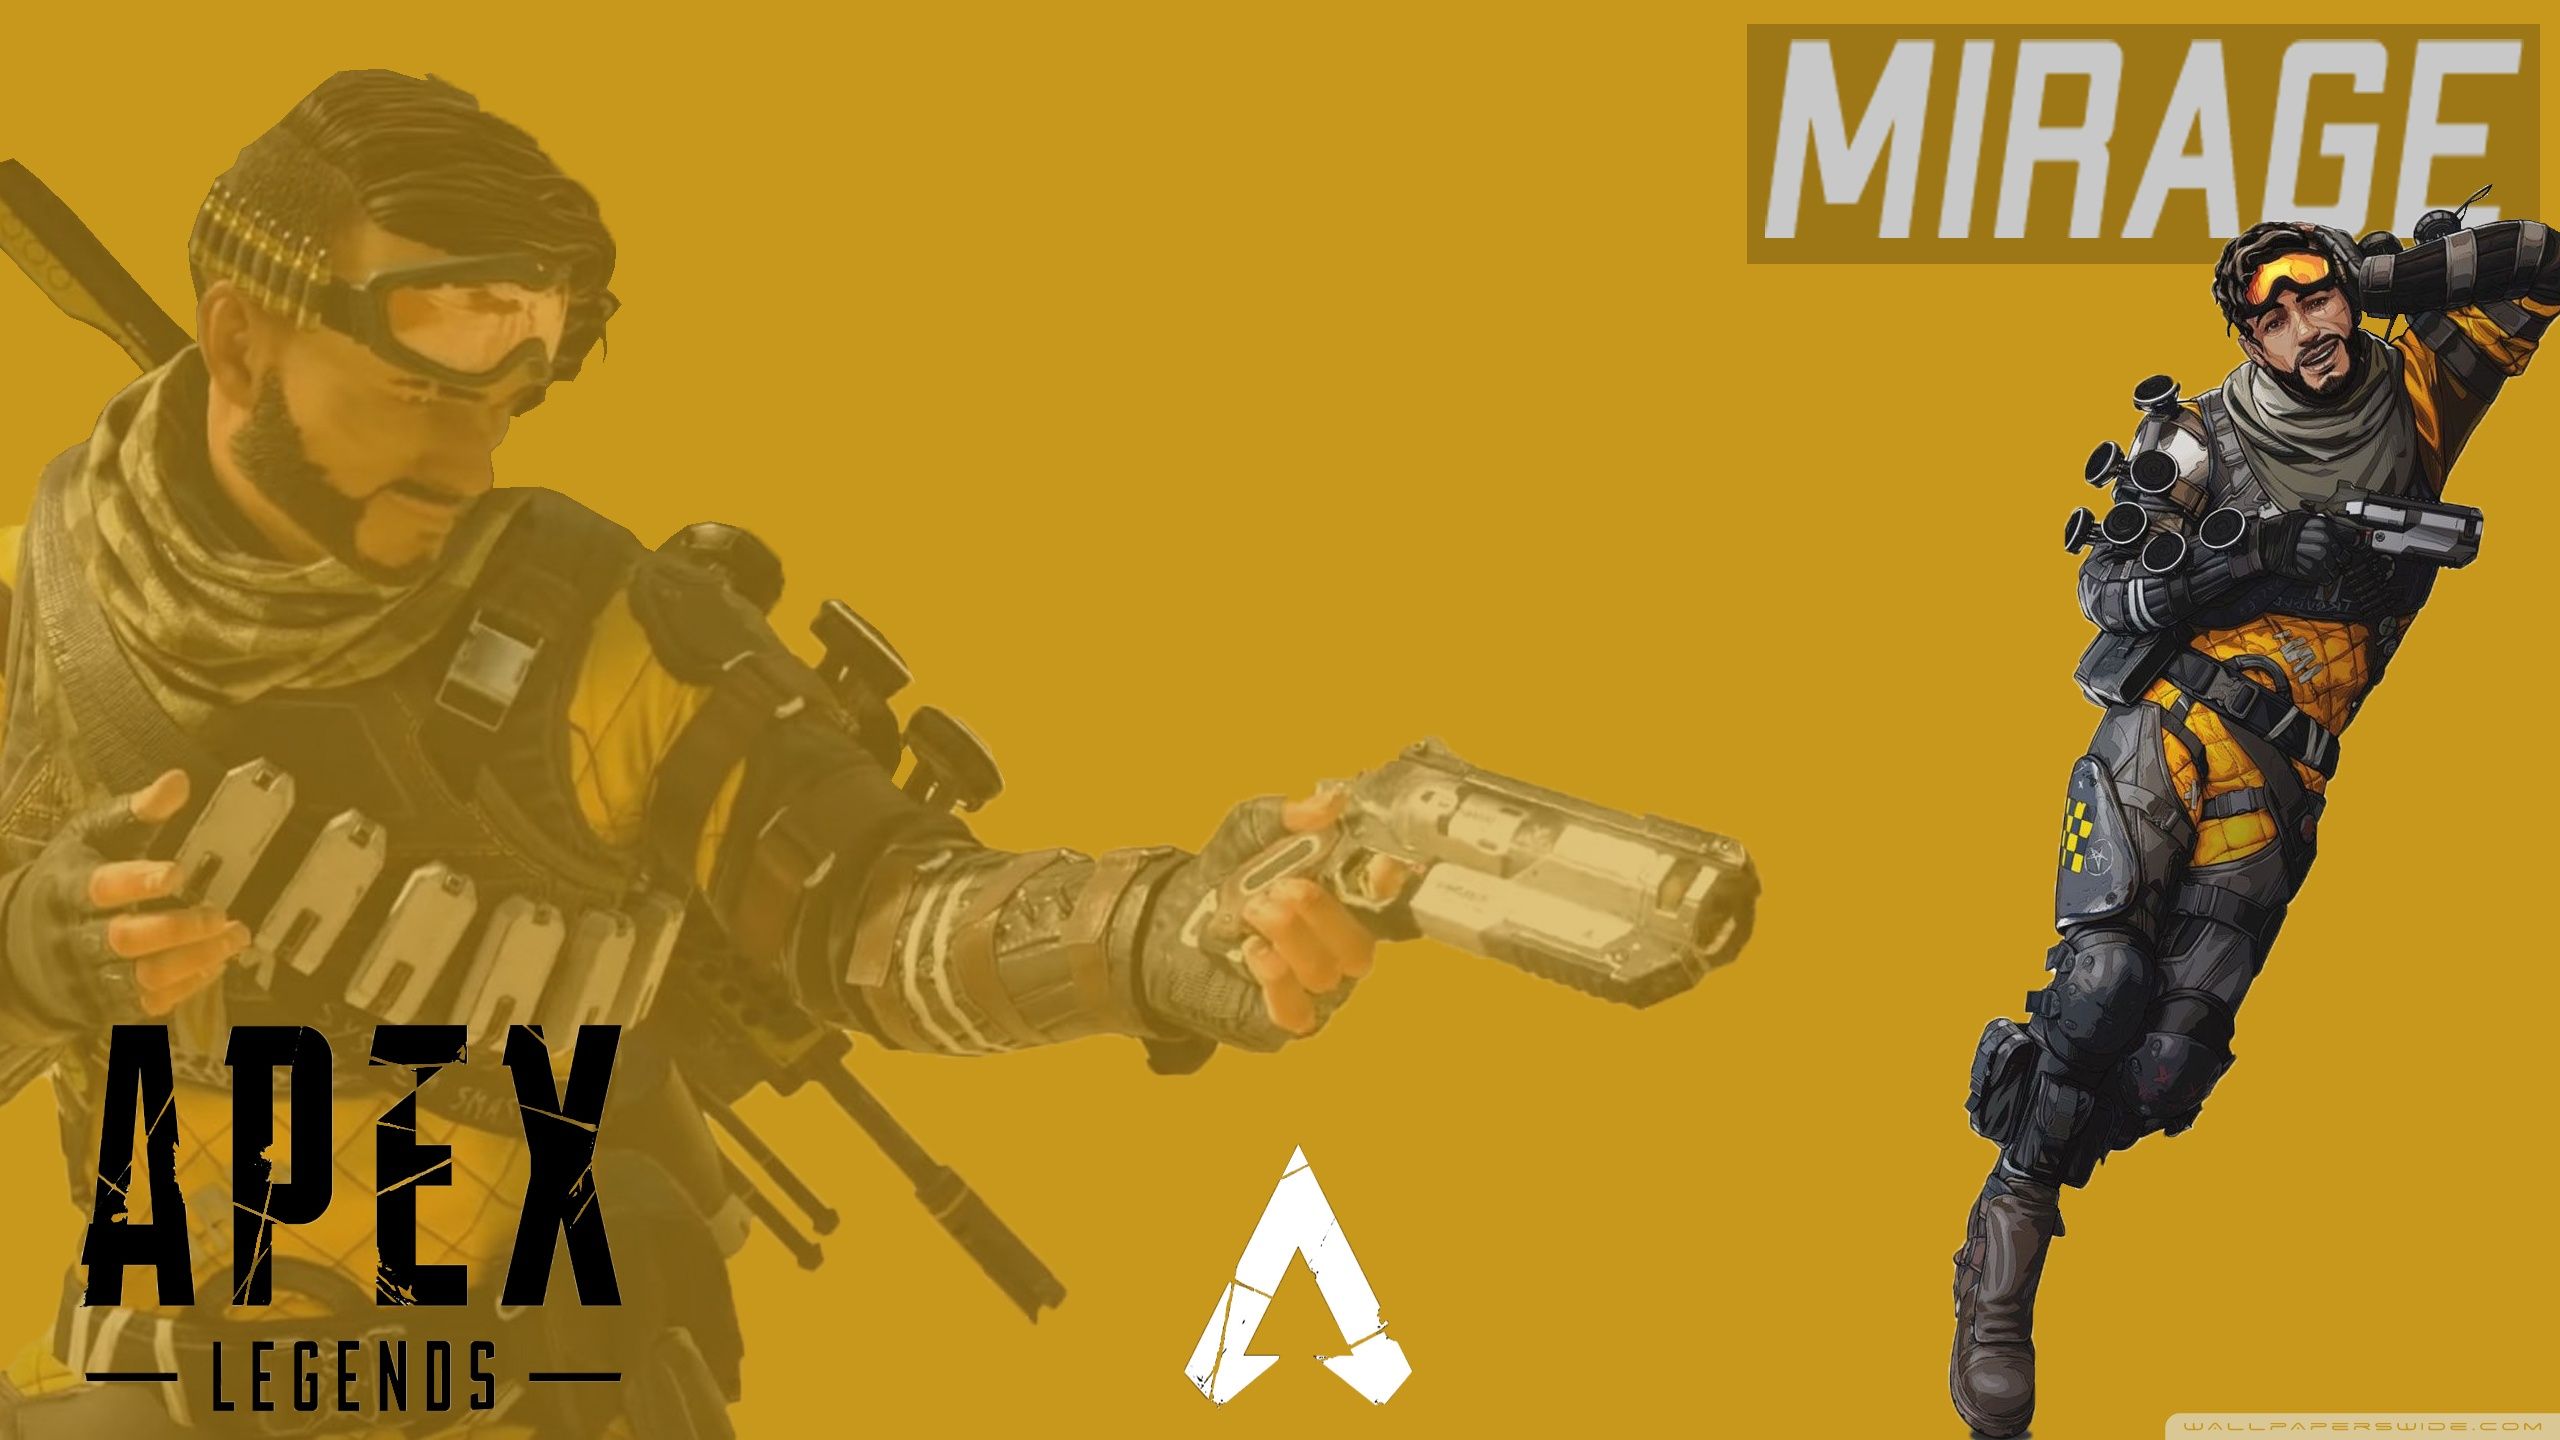 Apex Legends Mirage Wallpapers posted by Michelle Tremblay.